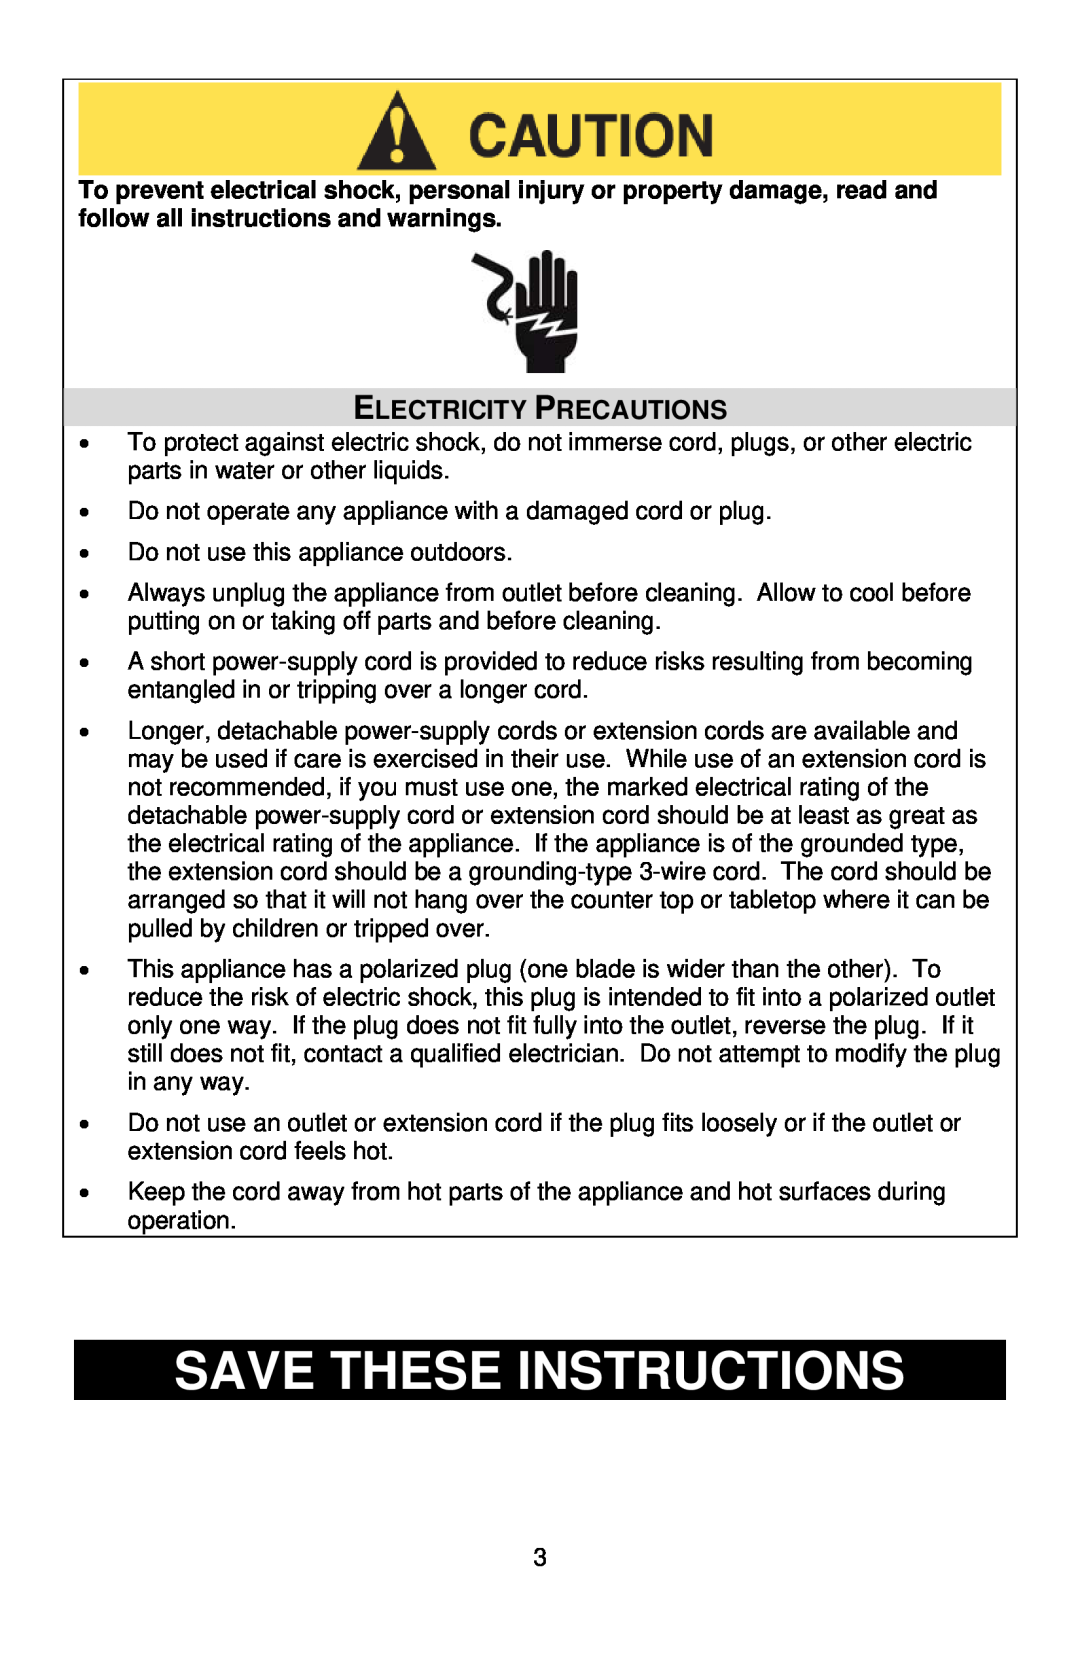 West Bend 86675 instruction manual Save These Instructions, Electricity Precautions 